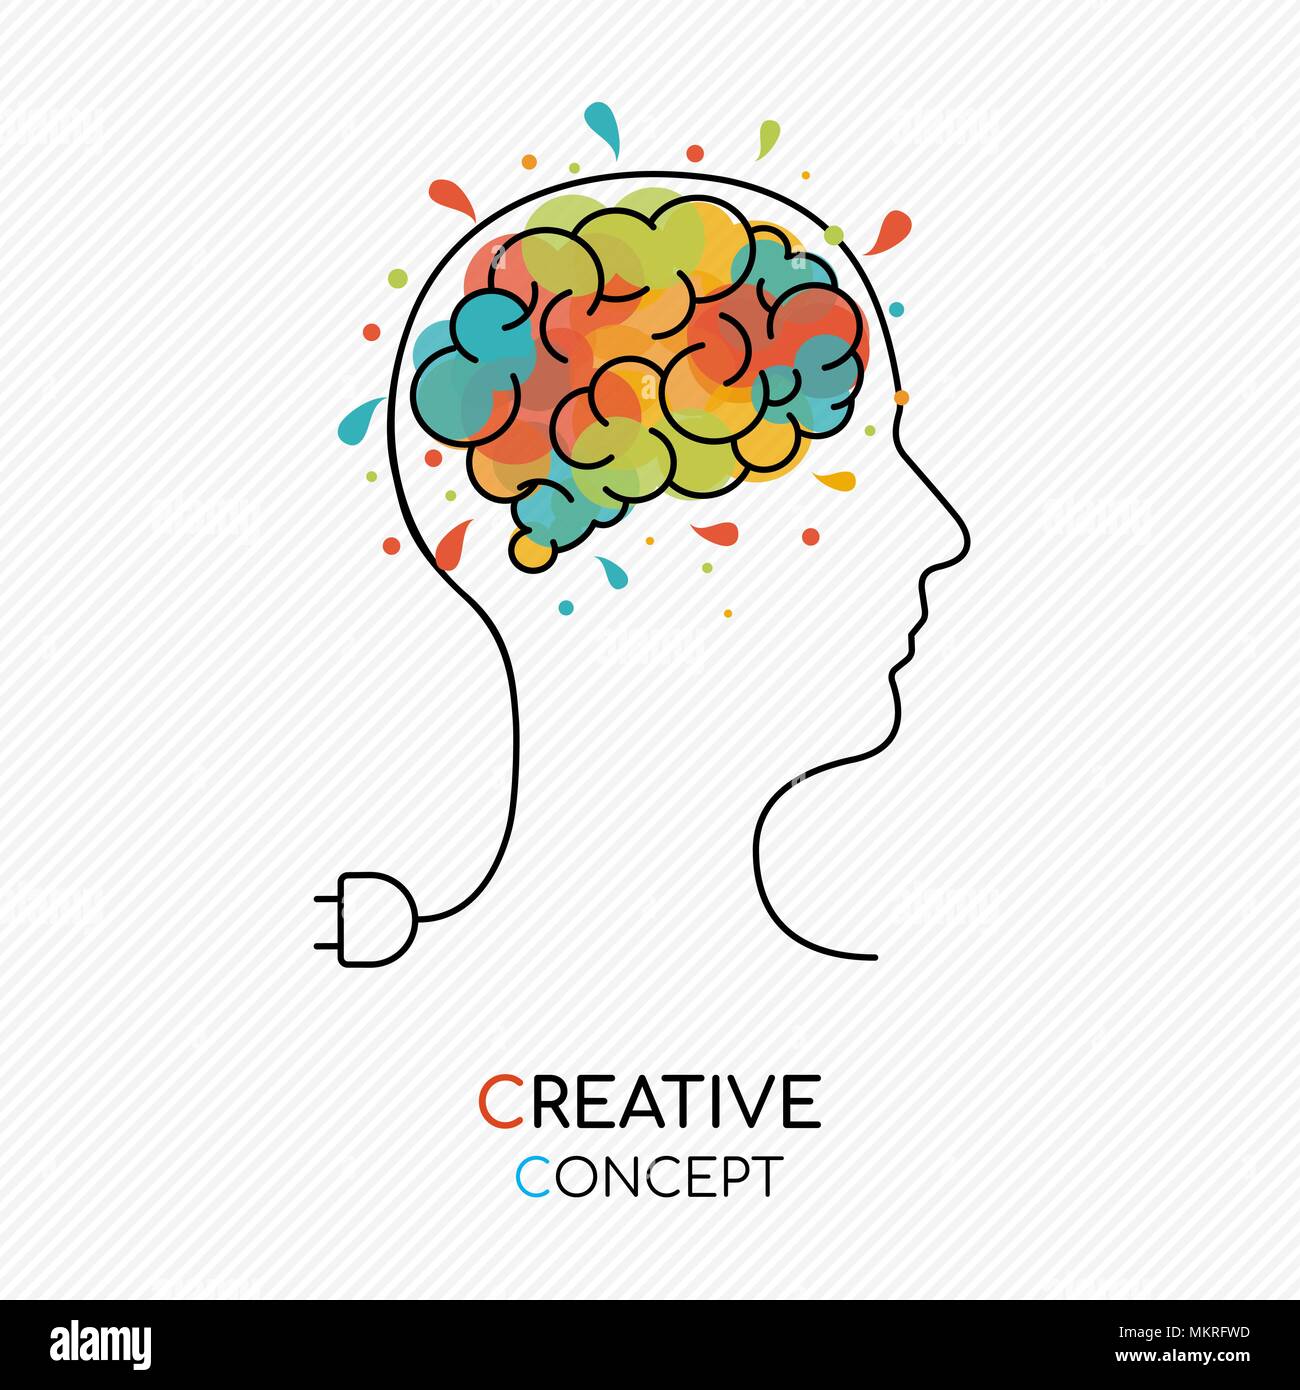 Creative thinking concept outline style illustration with human head as power wire and colorful art splash brain. EPS10 vector. Stock Vector